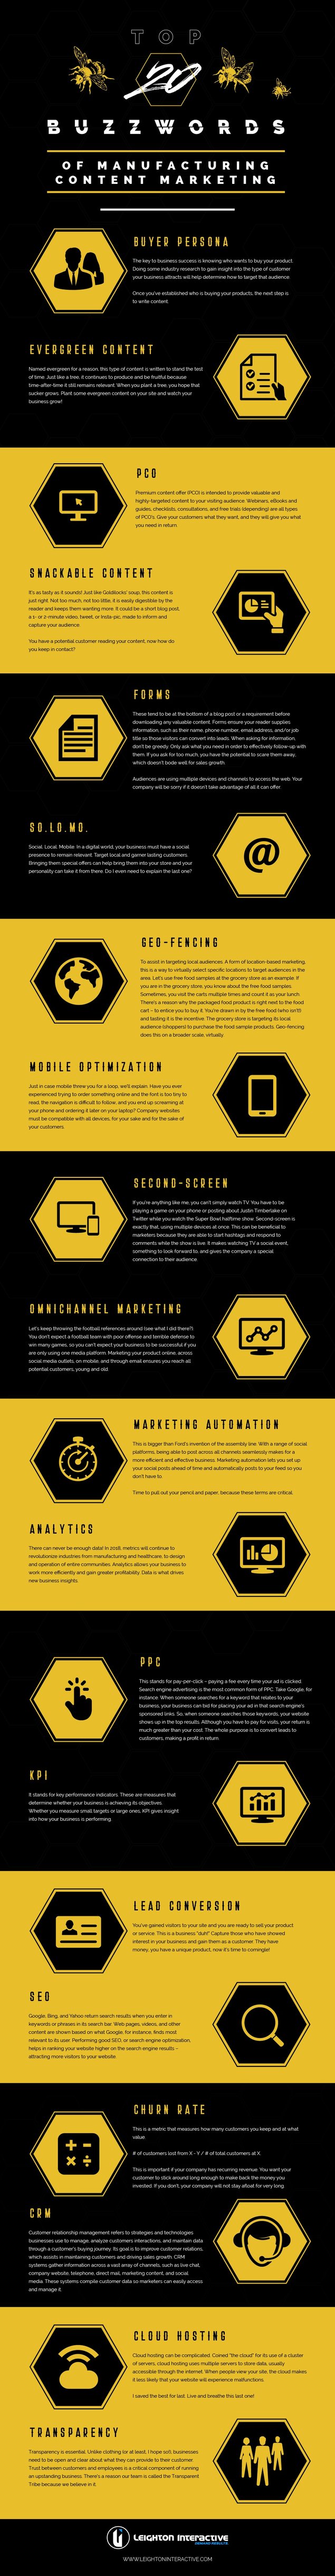 Top 20 Buzzwords of Manufacturing Content Marketing (Infographic)